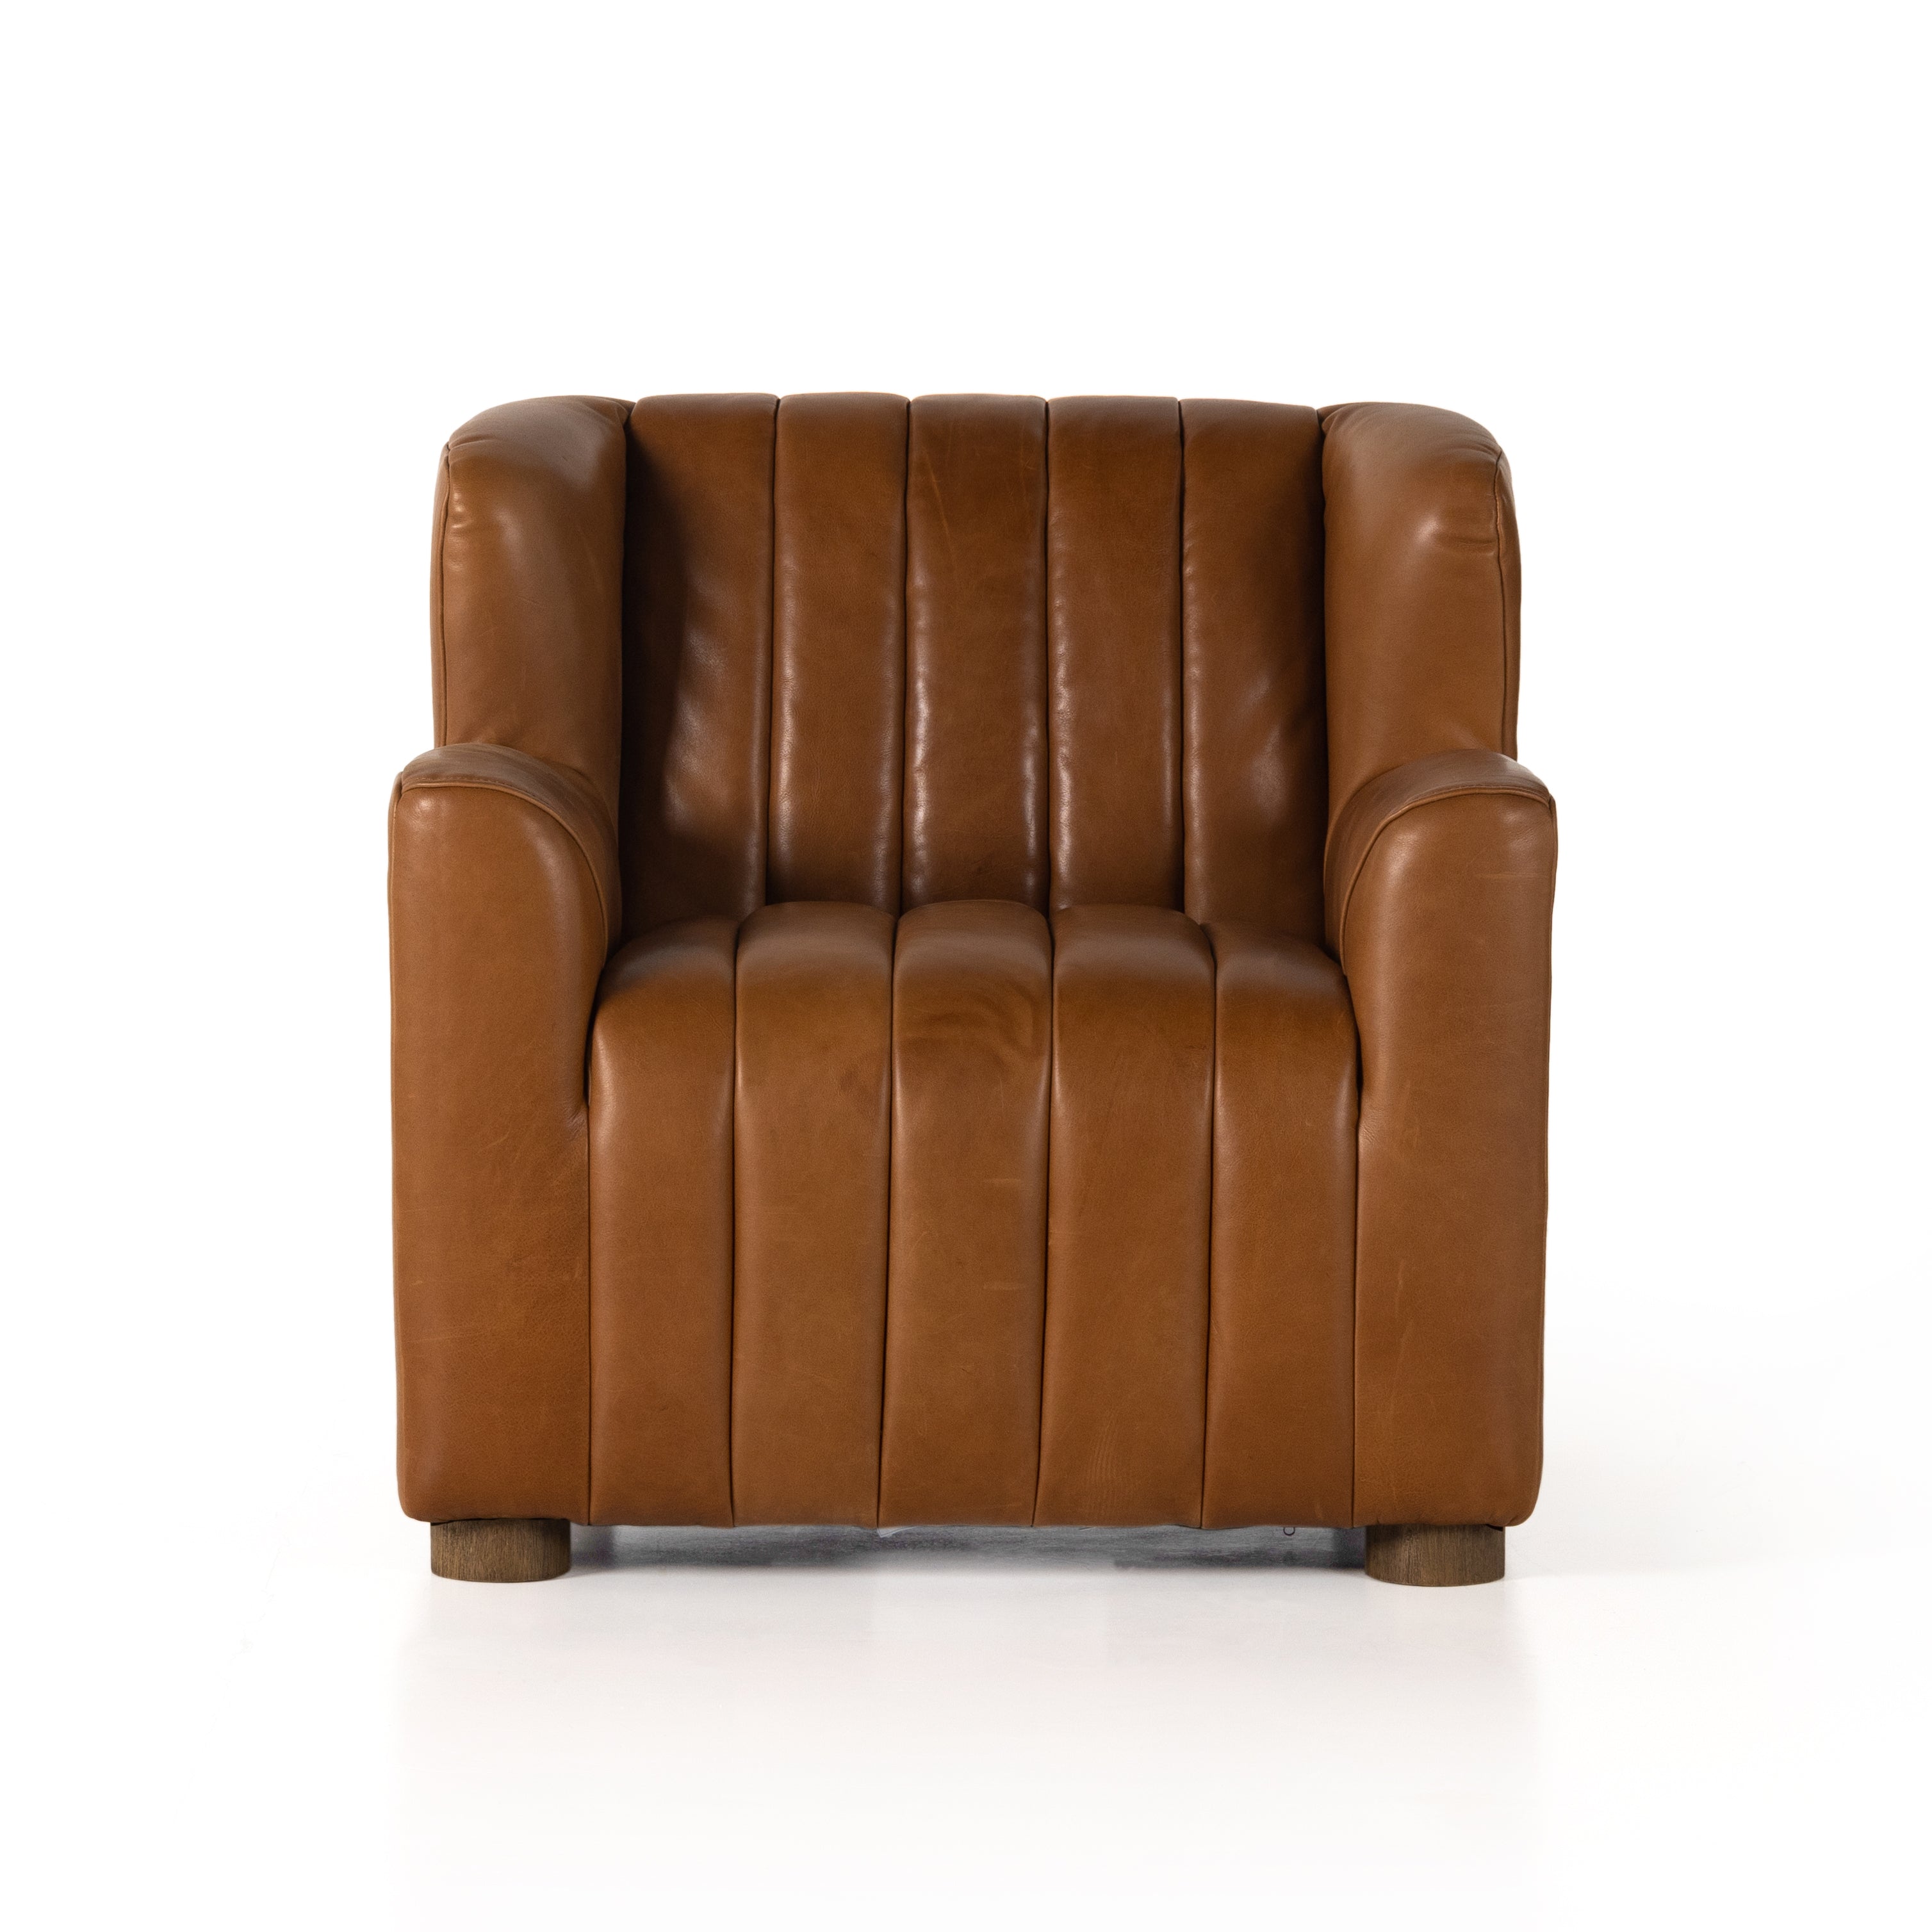 The classic wing-back club chair adopts heavy channeling for an even-comfier sit. Tobacco top-grain leather brings this retro lounge-inspired chair up to modern speed. Amethyst Home provides interior design, new construction, custom furniture, and area rugs in the Laguna Beach metro area.